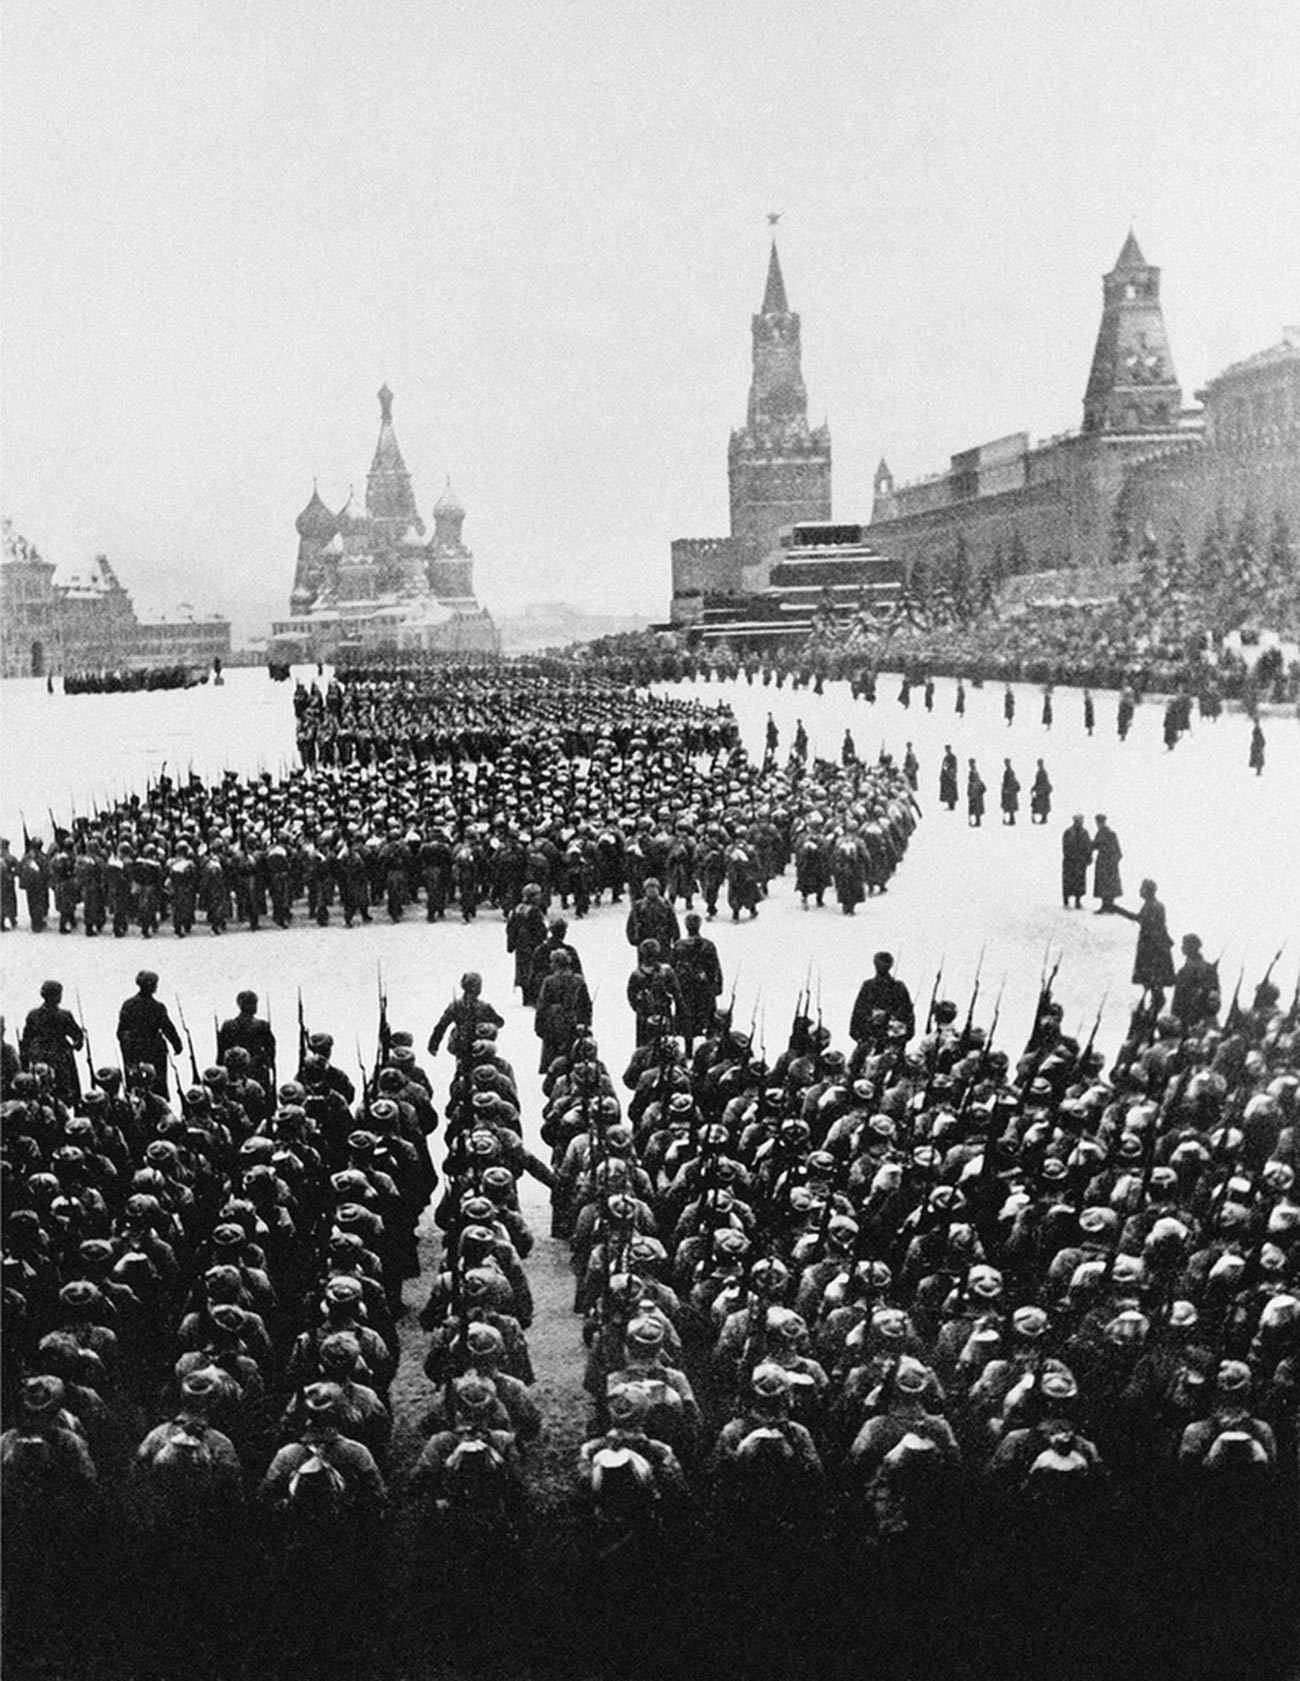 The military parade on Red Square on November 7, 1941. 